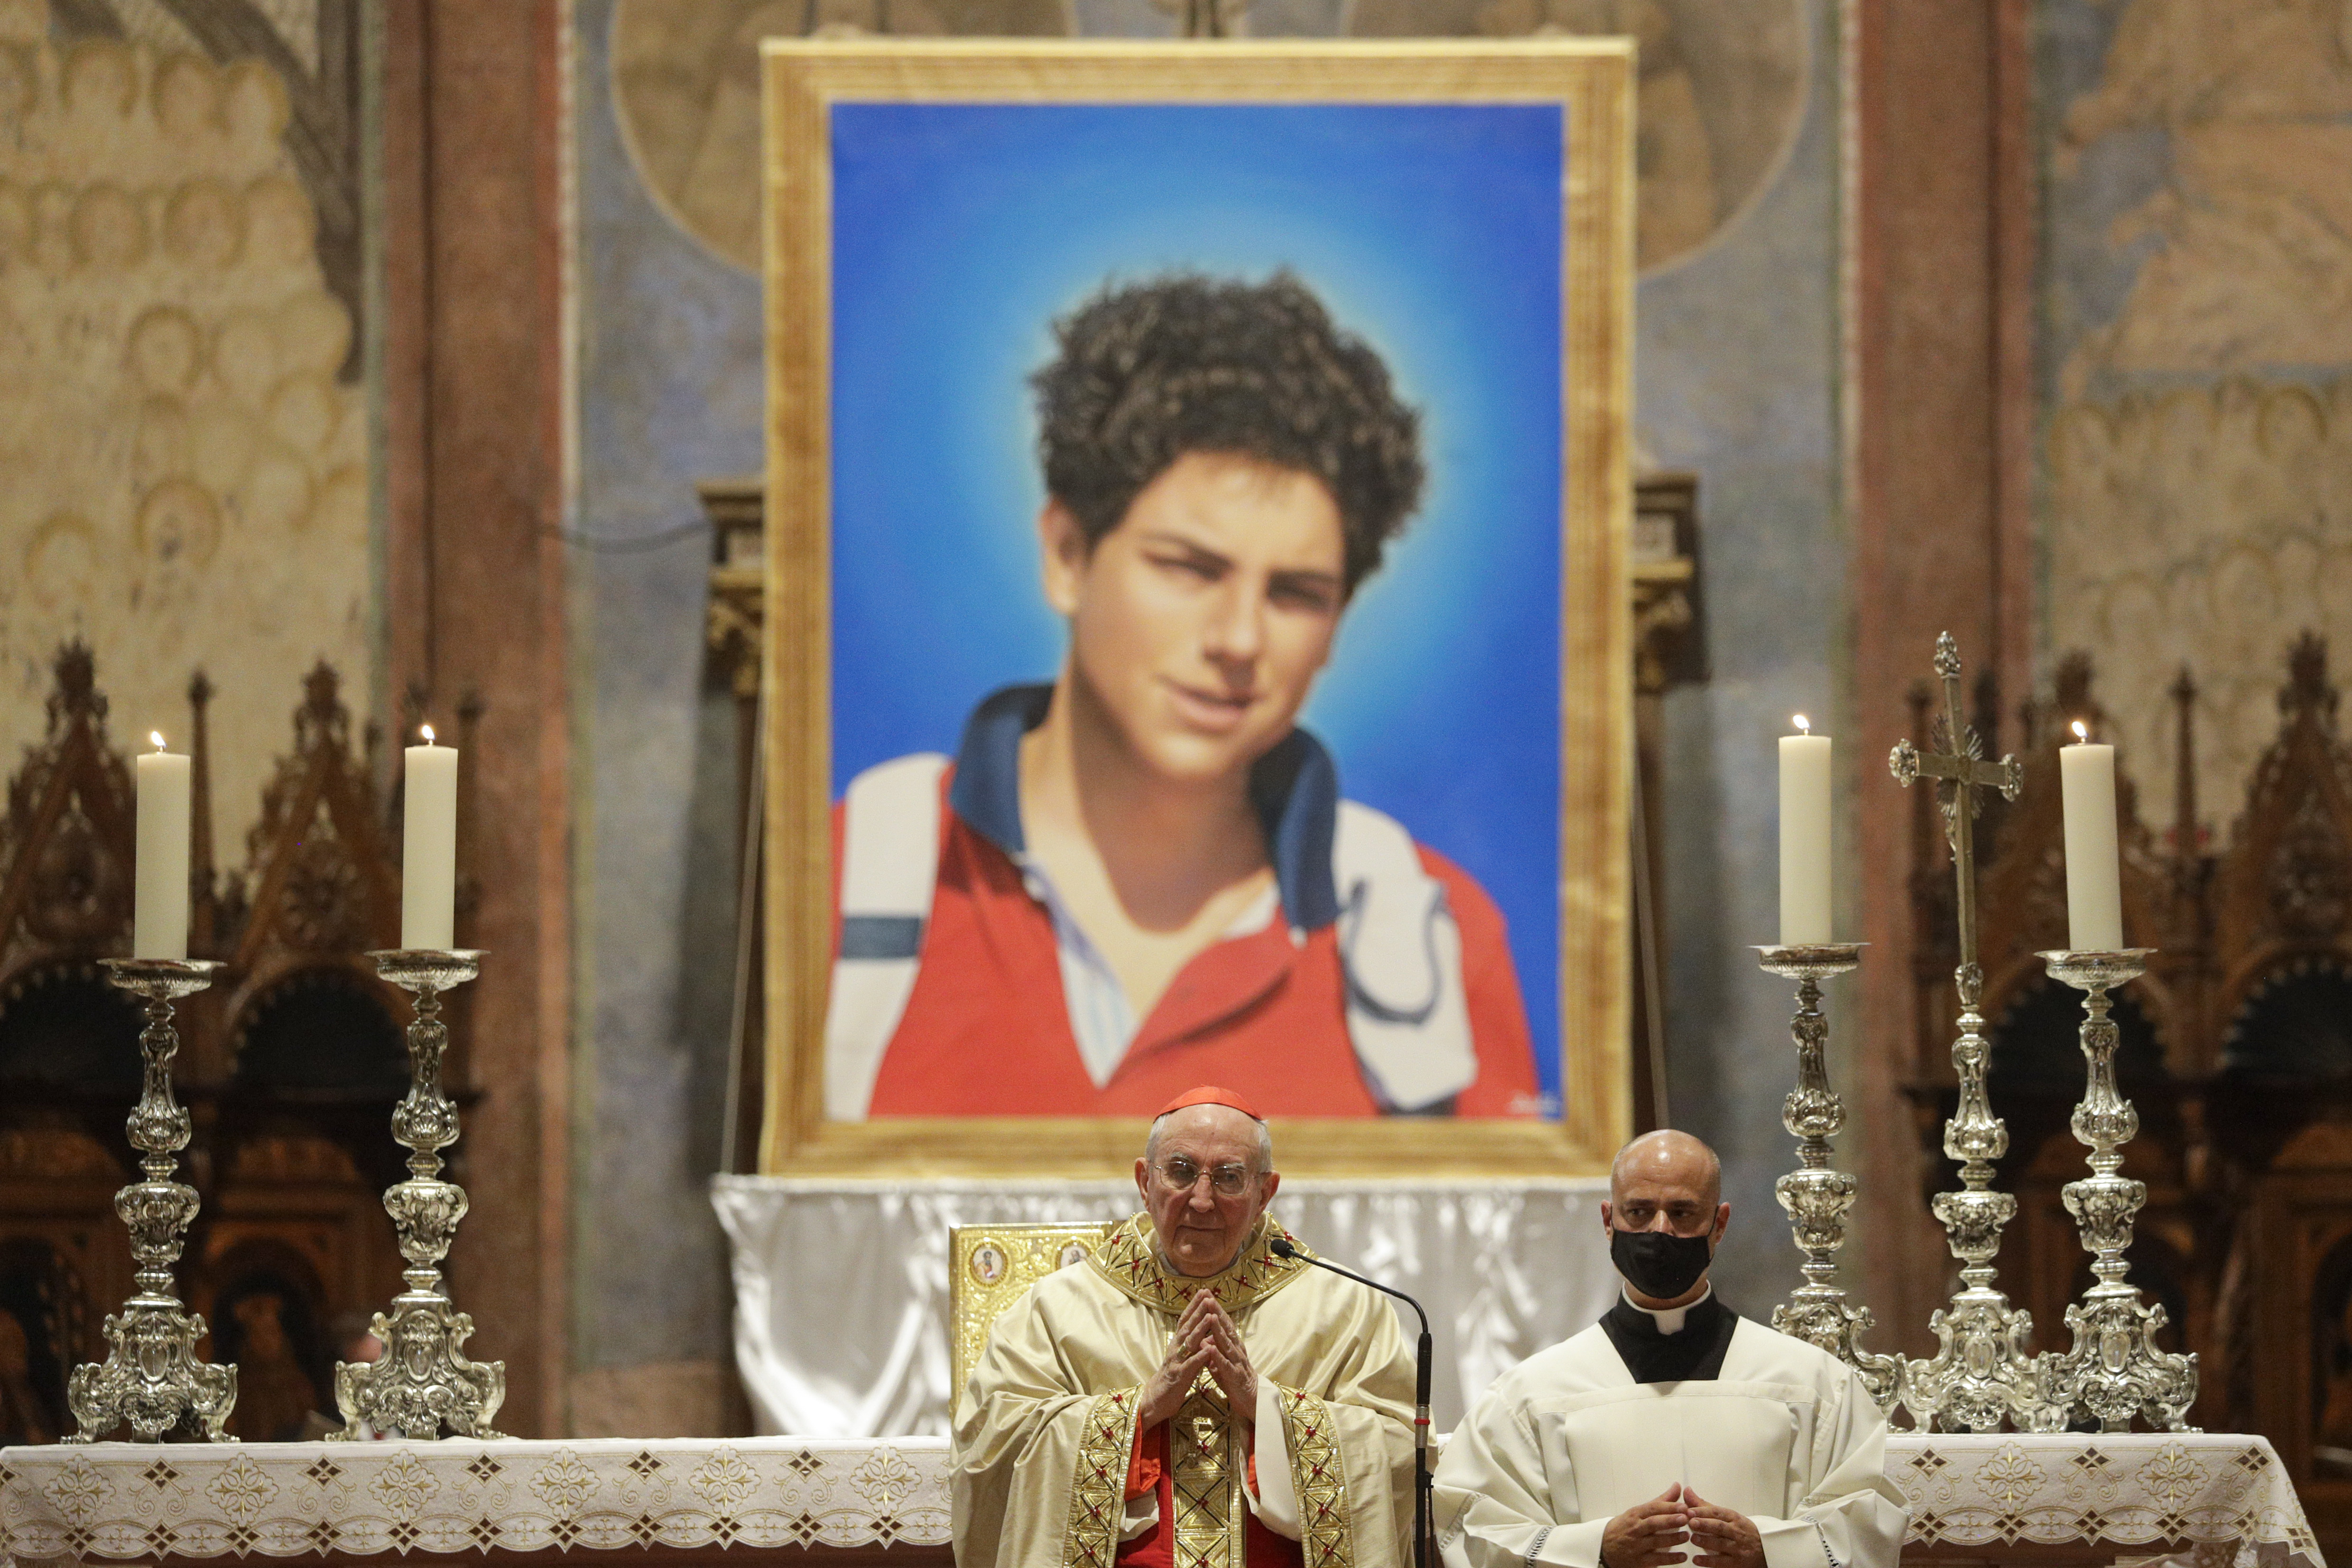 Carlo’s photo on display at a beatification ceremony in Assisi in 2020